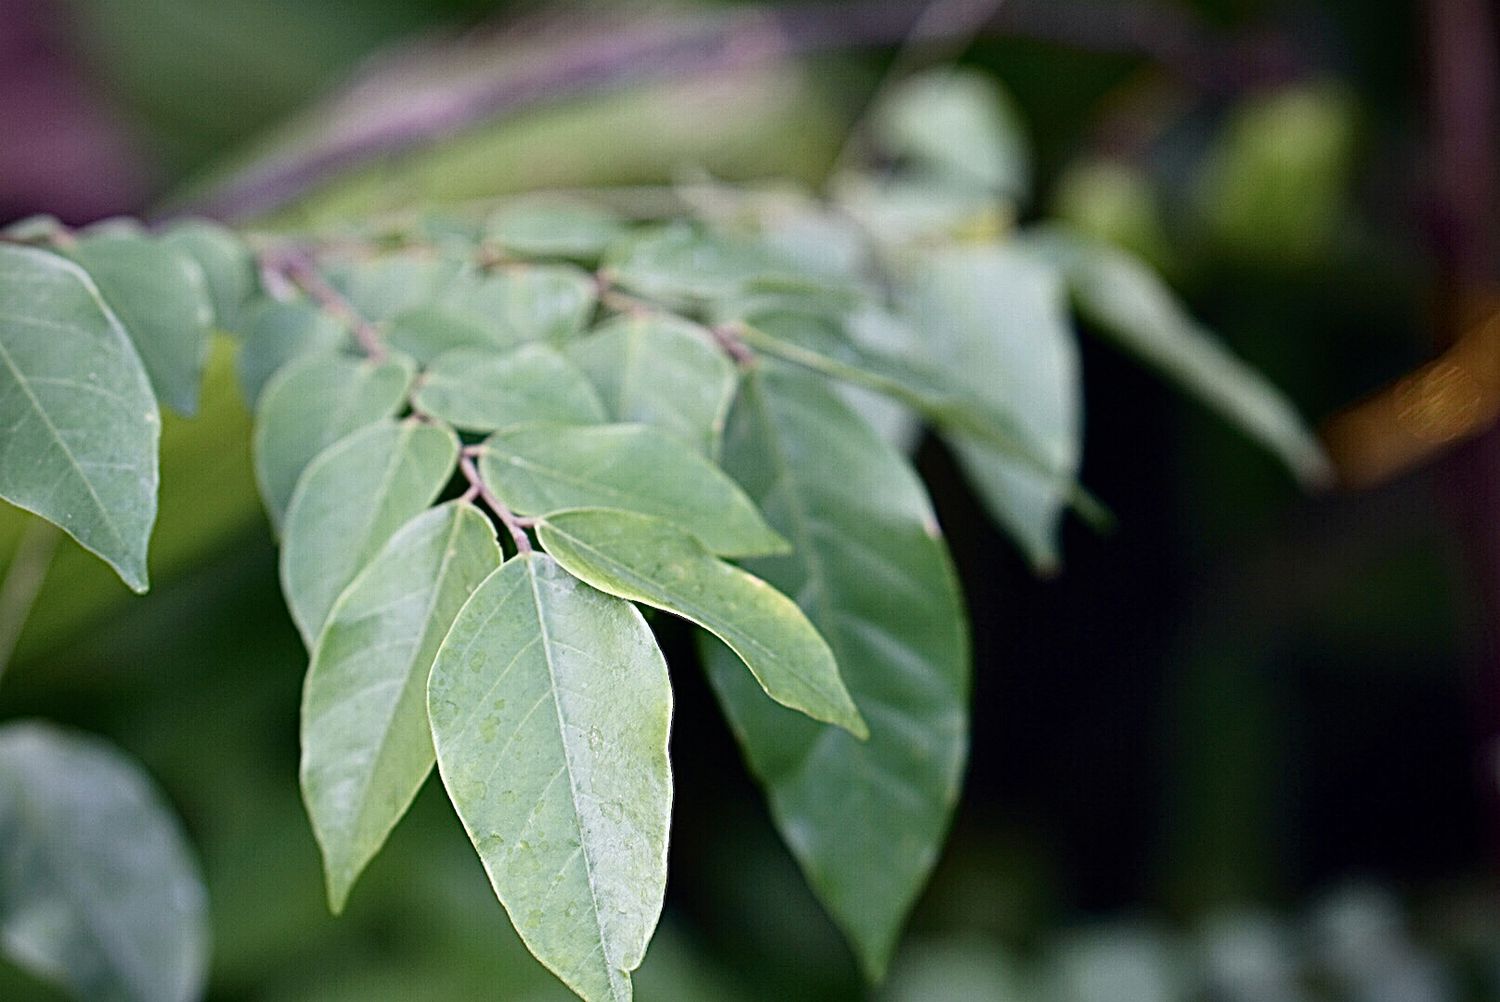 Starfruit branches with arrowhead-shaped leaves closeup